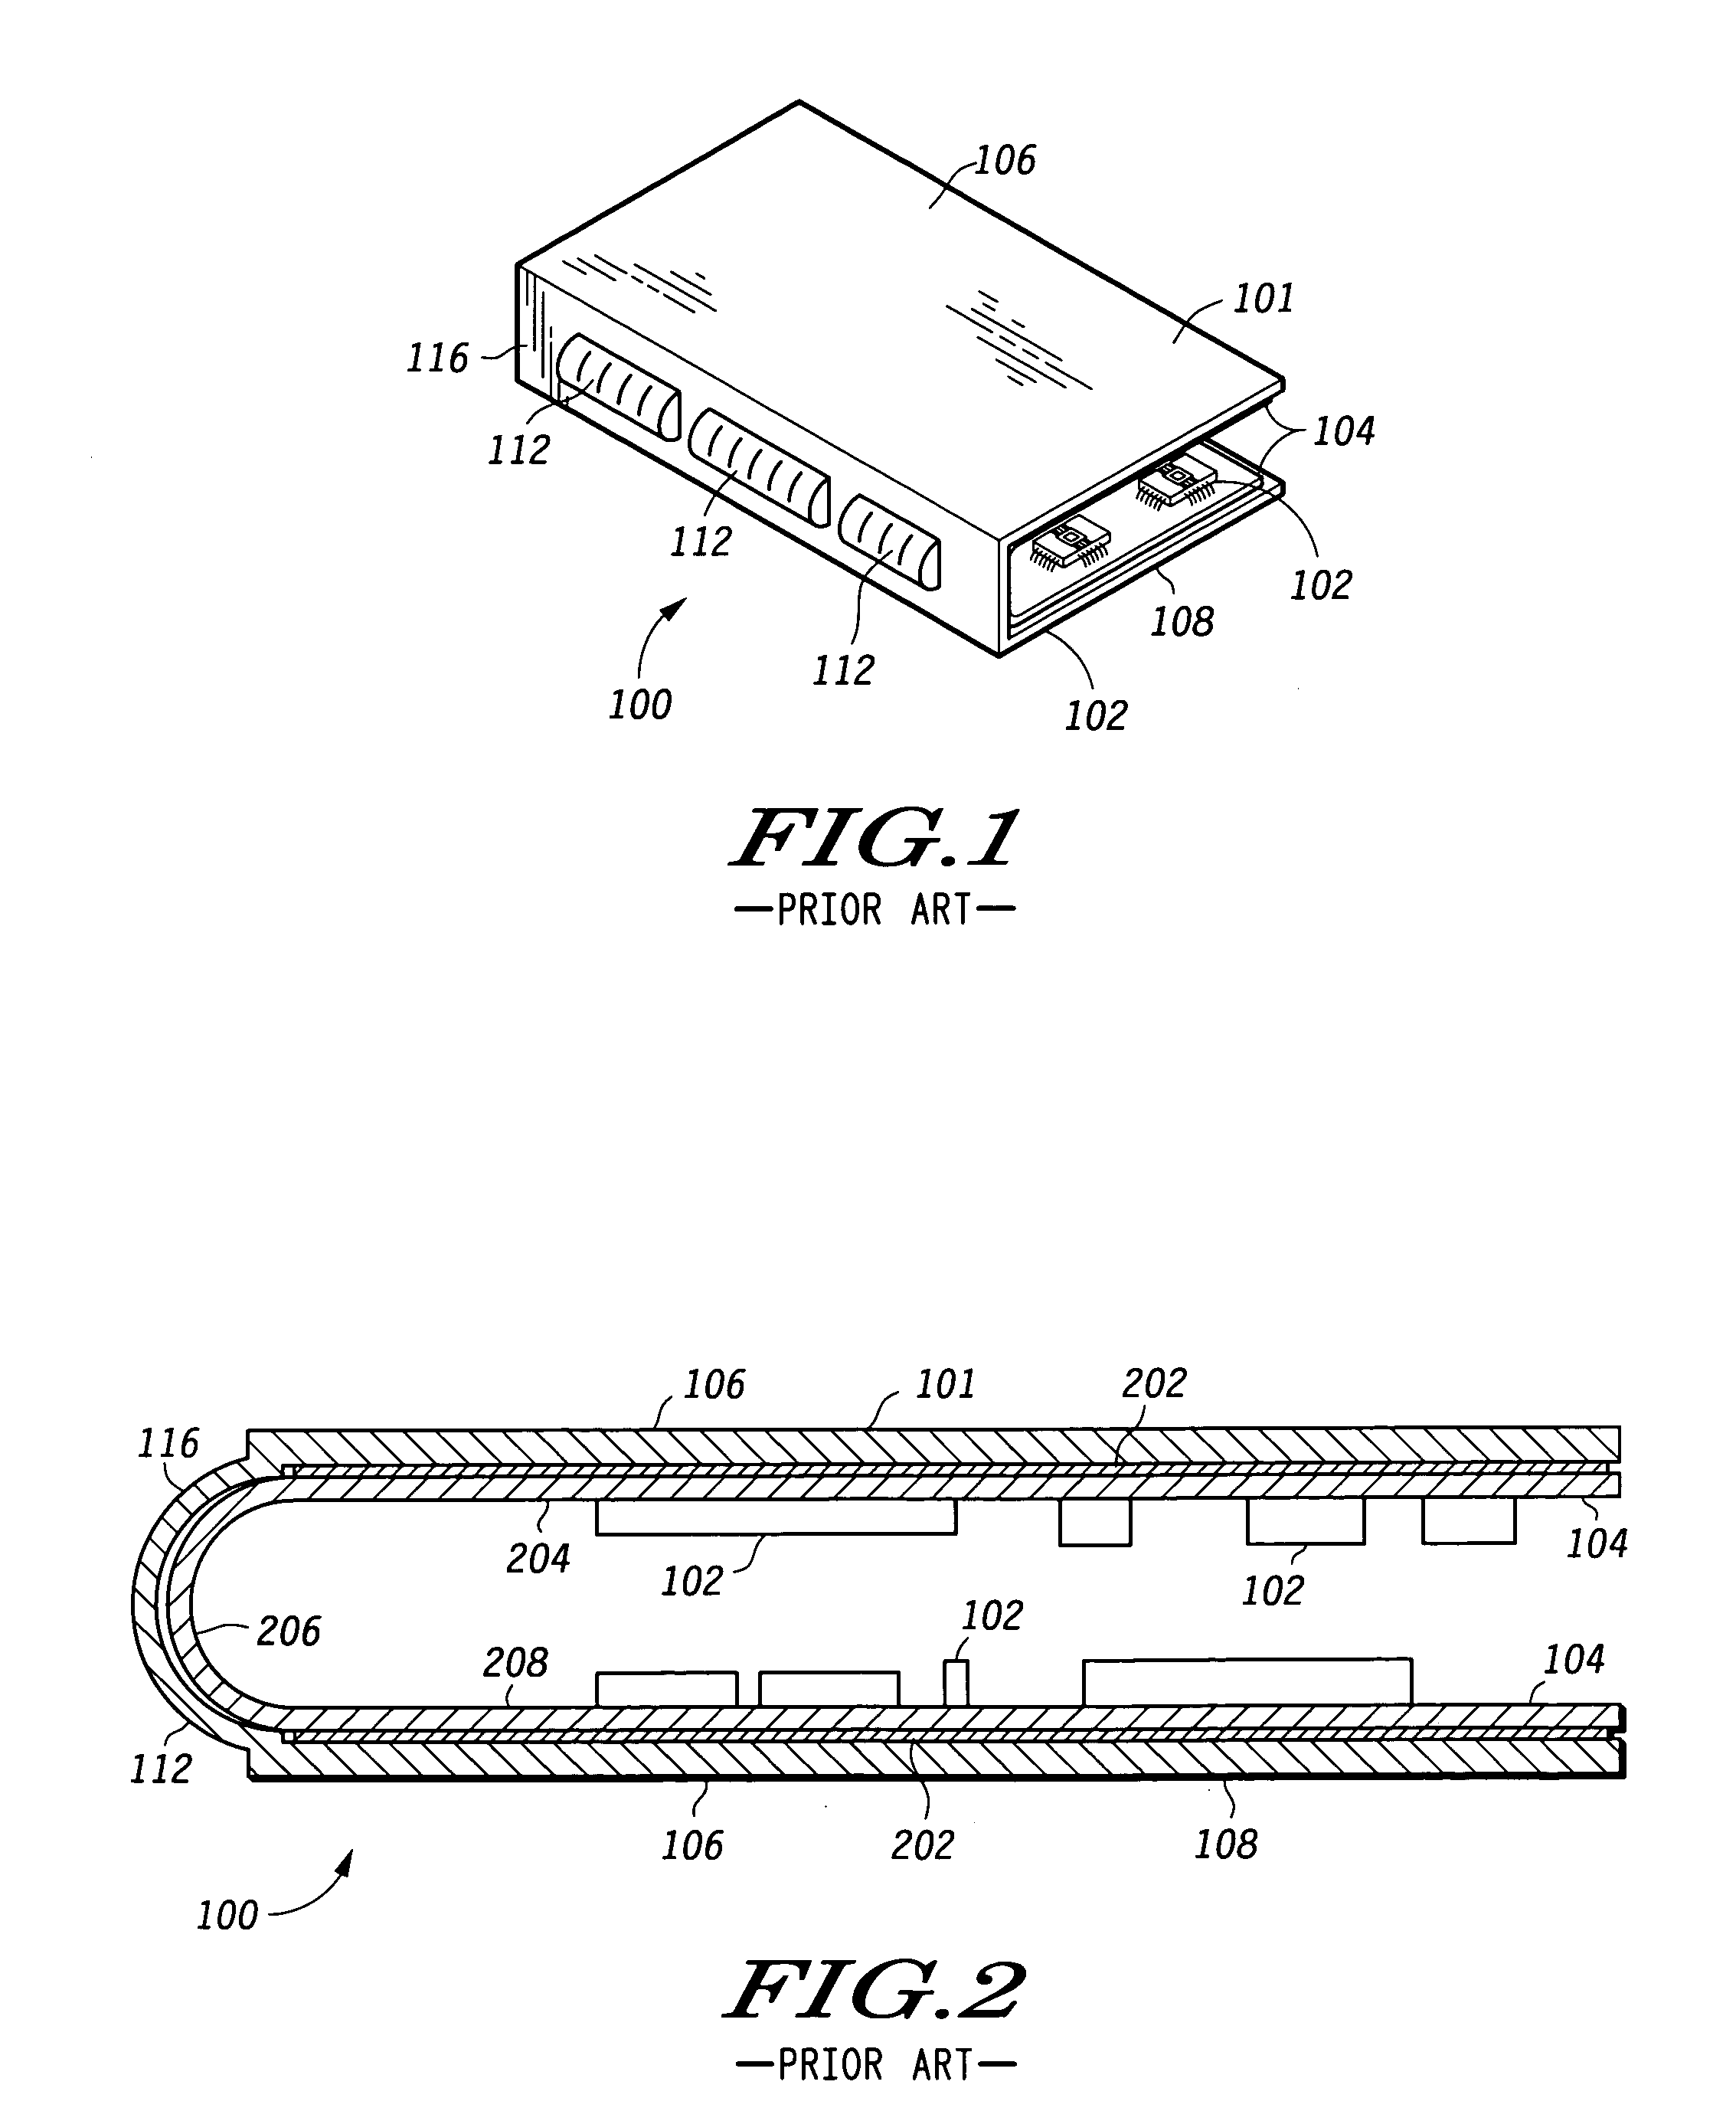 Flexible circuit board assembly